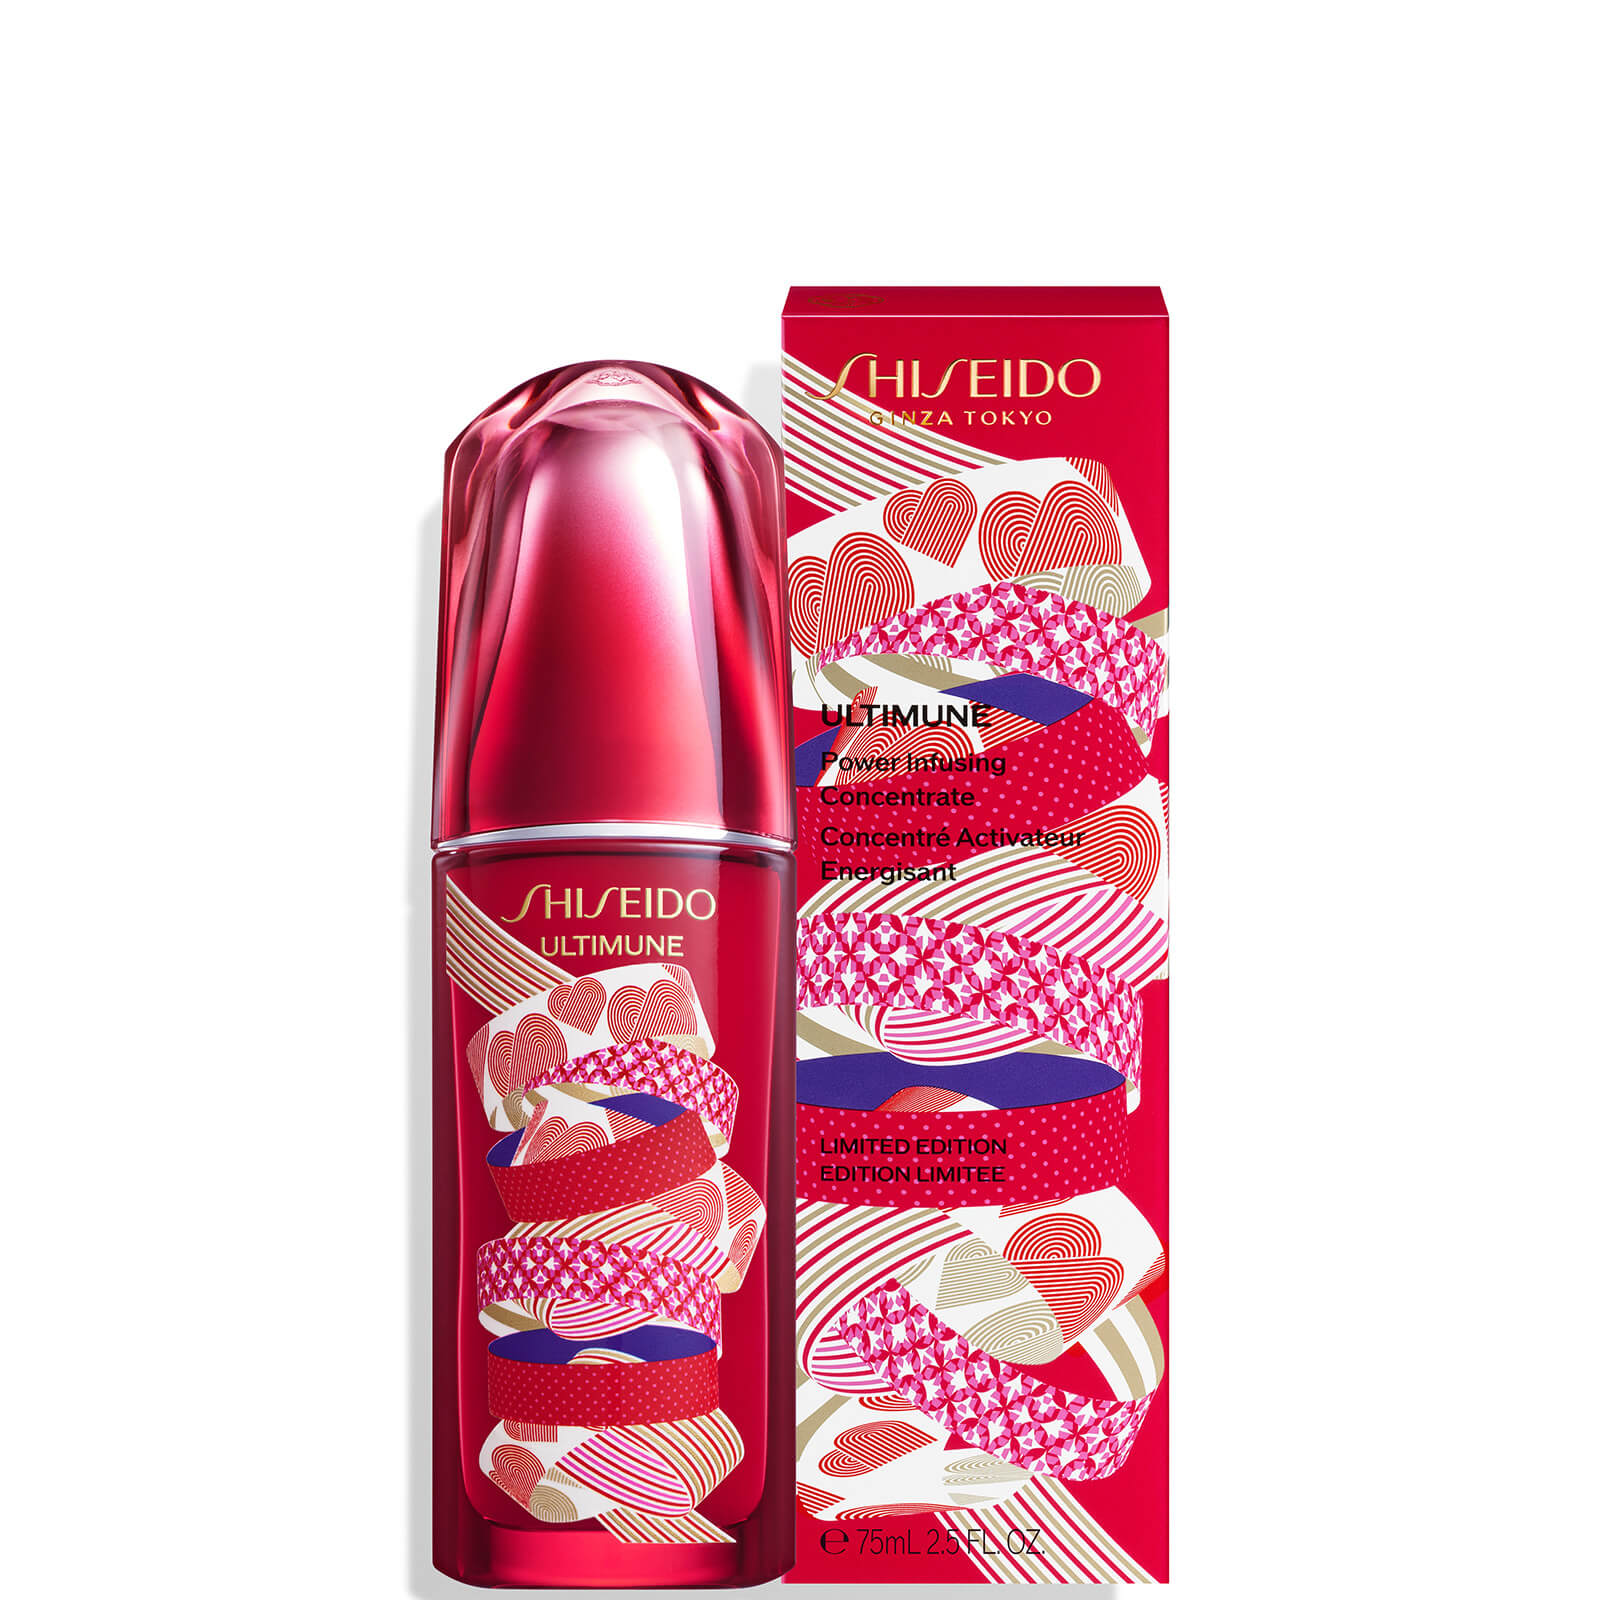 Image of Shiseido Ultimune Power Infusing Concentrate Limited Edition (Various Sizes) - 75ml